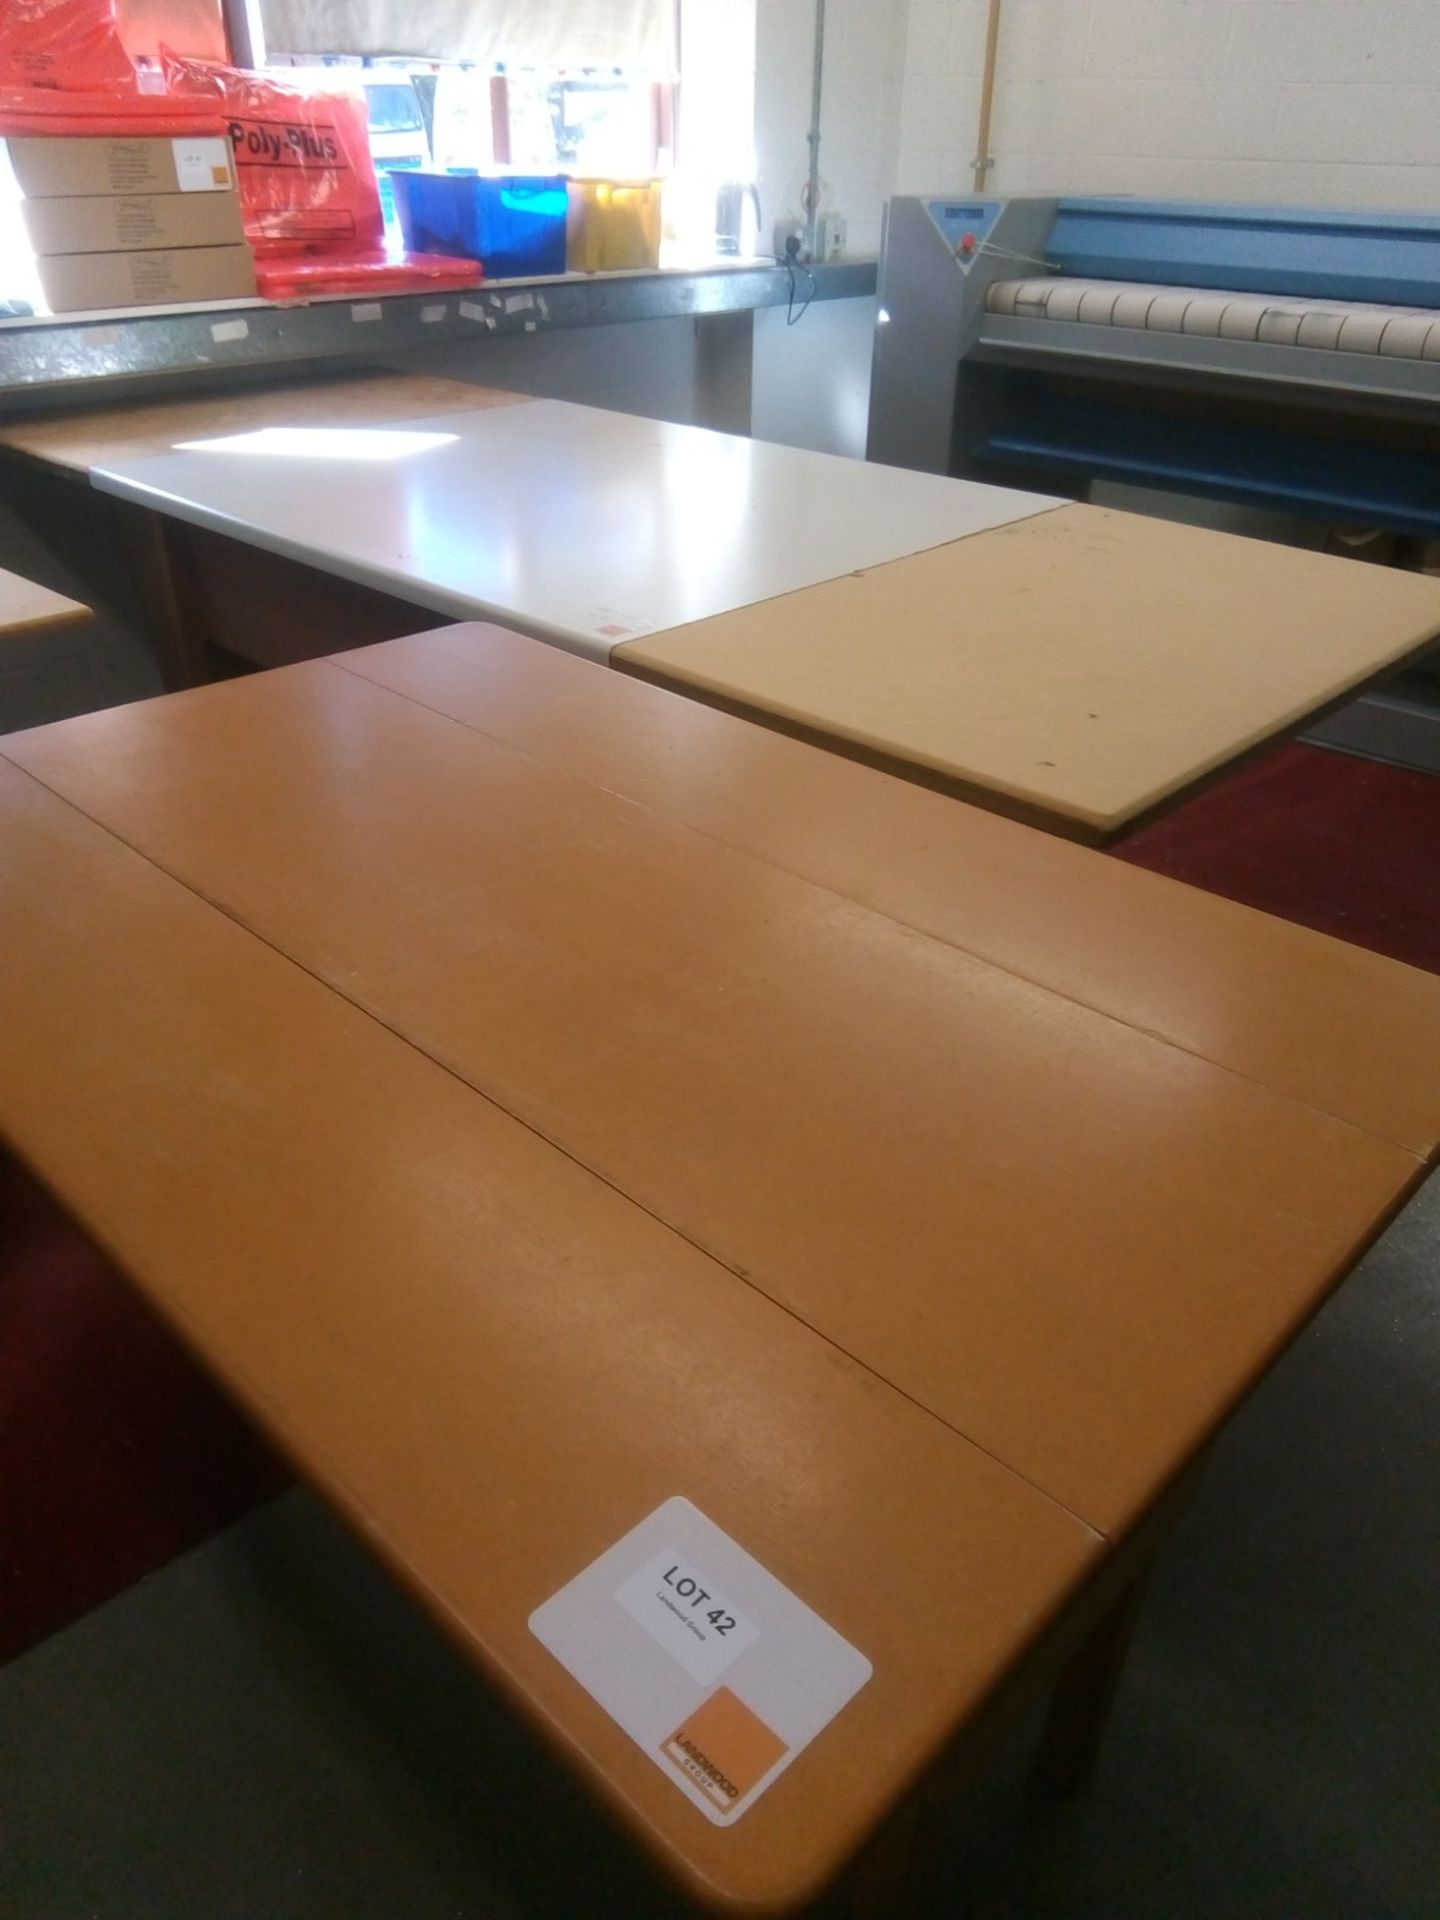 2 x extendable mobile work tables. 3000x1200 and 1400x950 each fully extended.